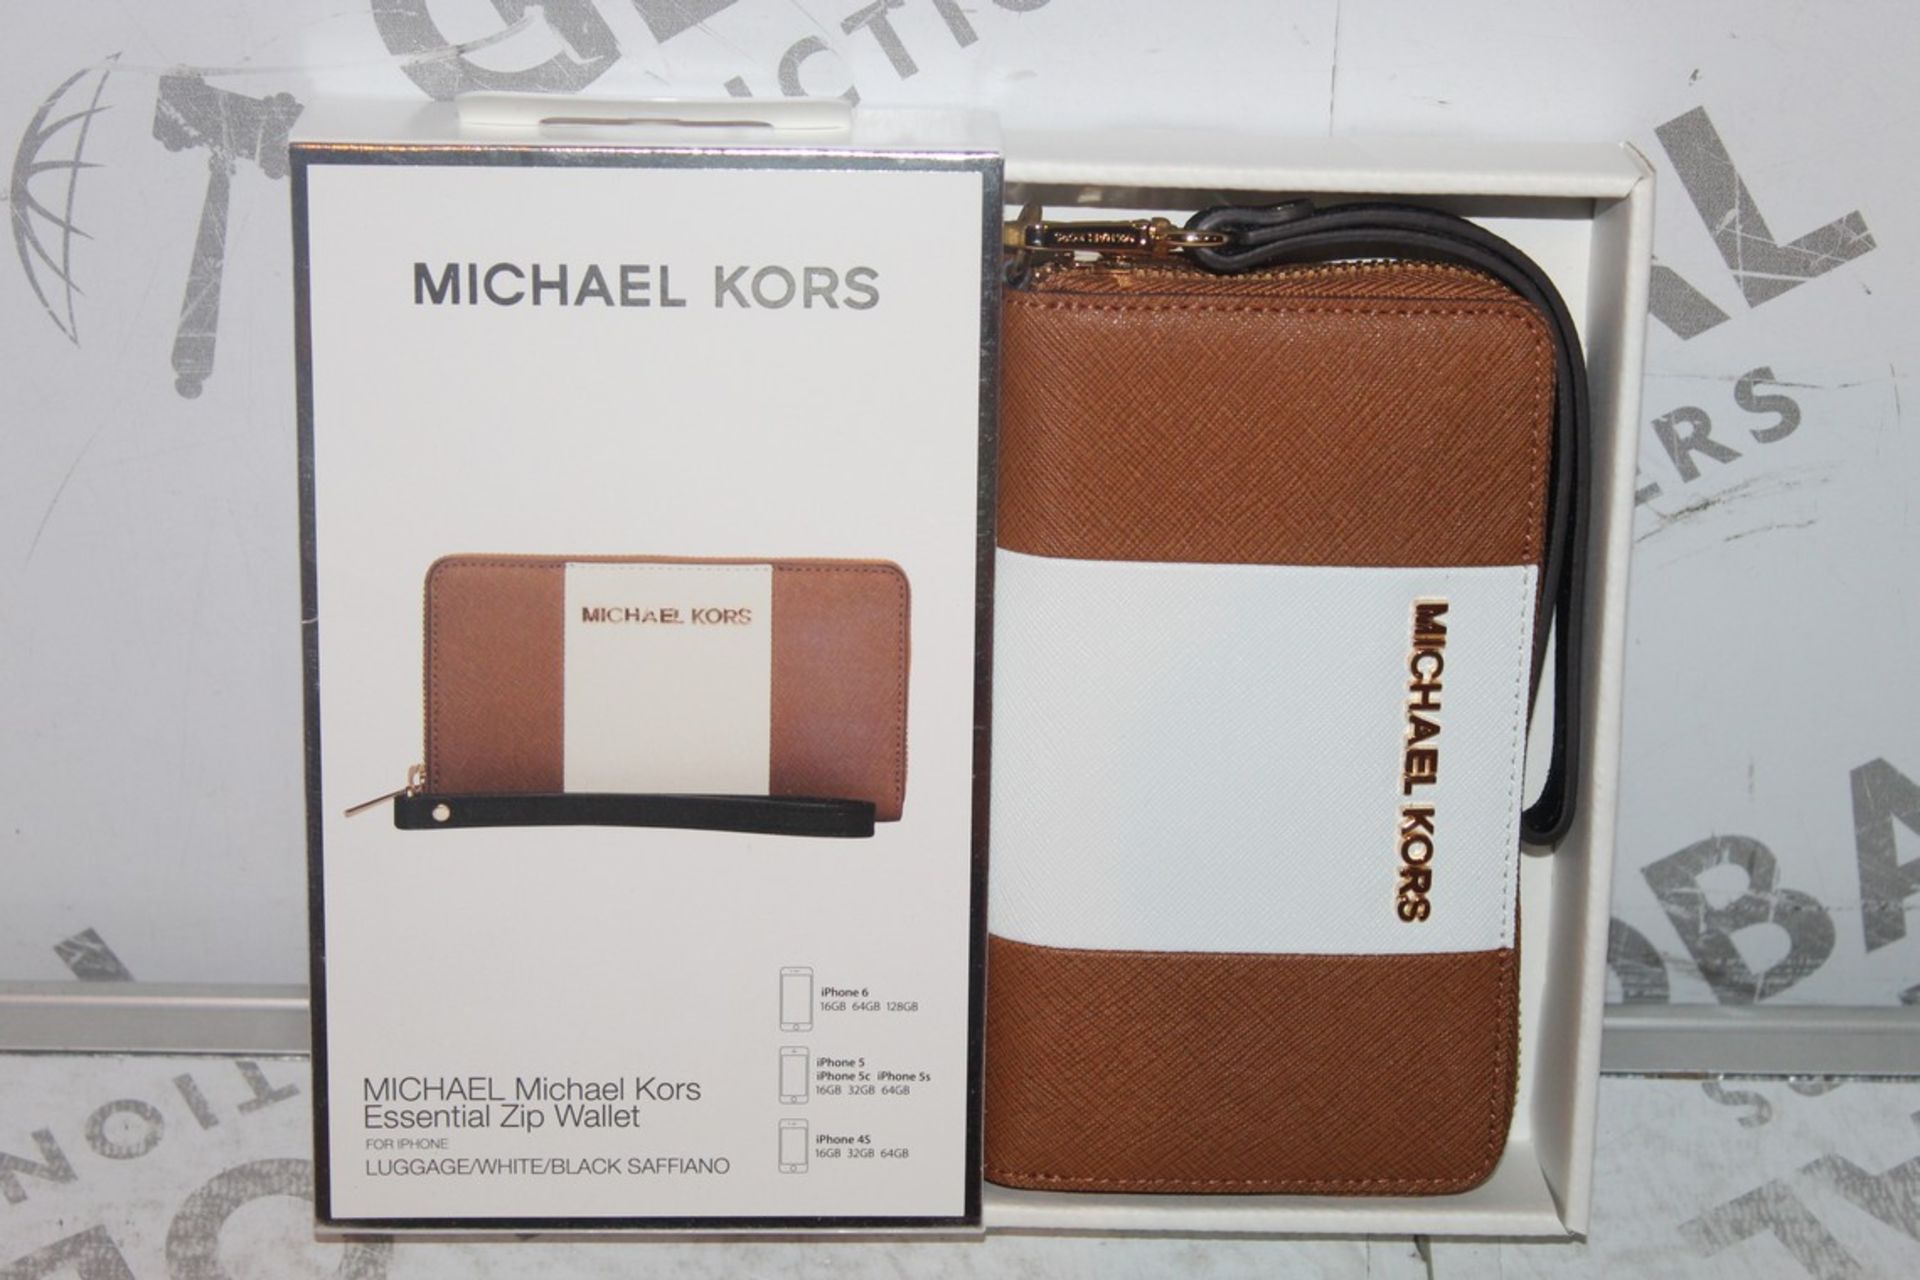 Lot to Contain 2 Michael Kors Multi Function Essential Zip Wallets with Phone Holder in Brown and